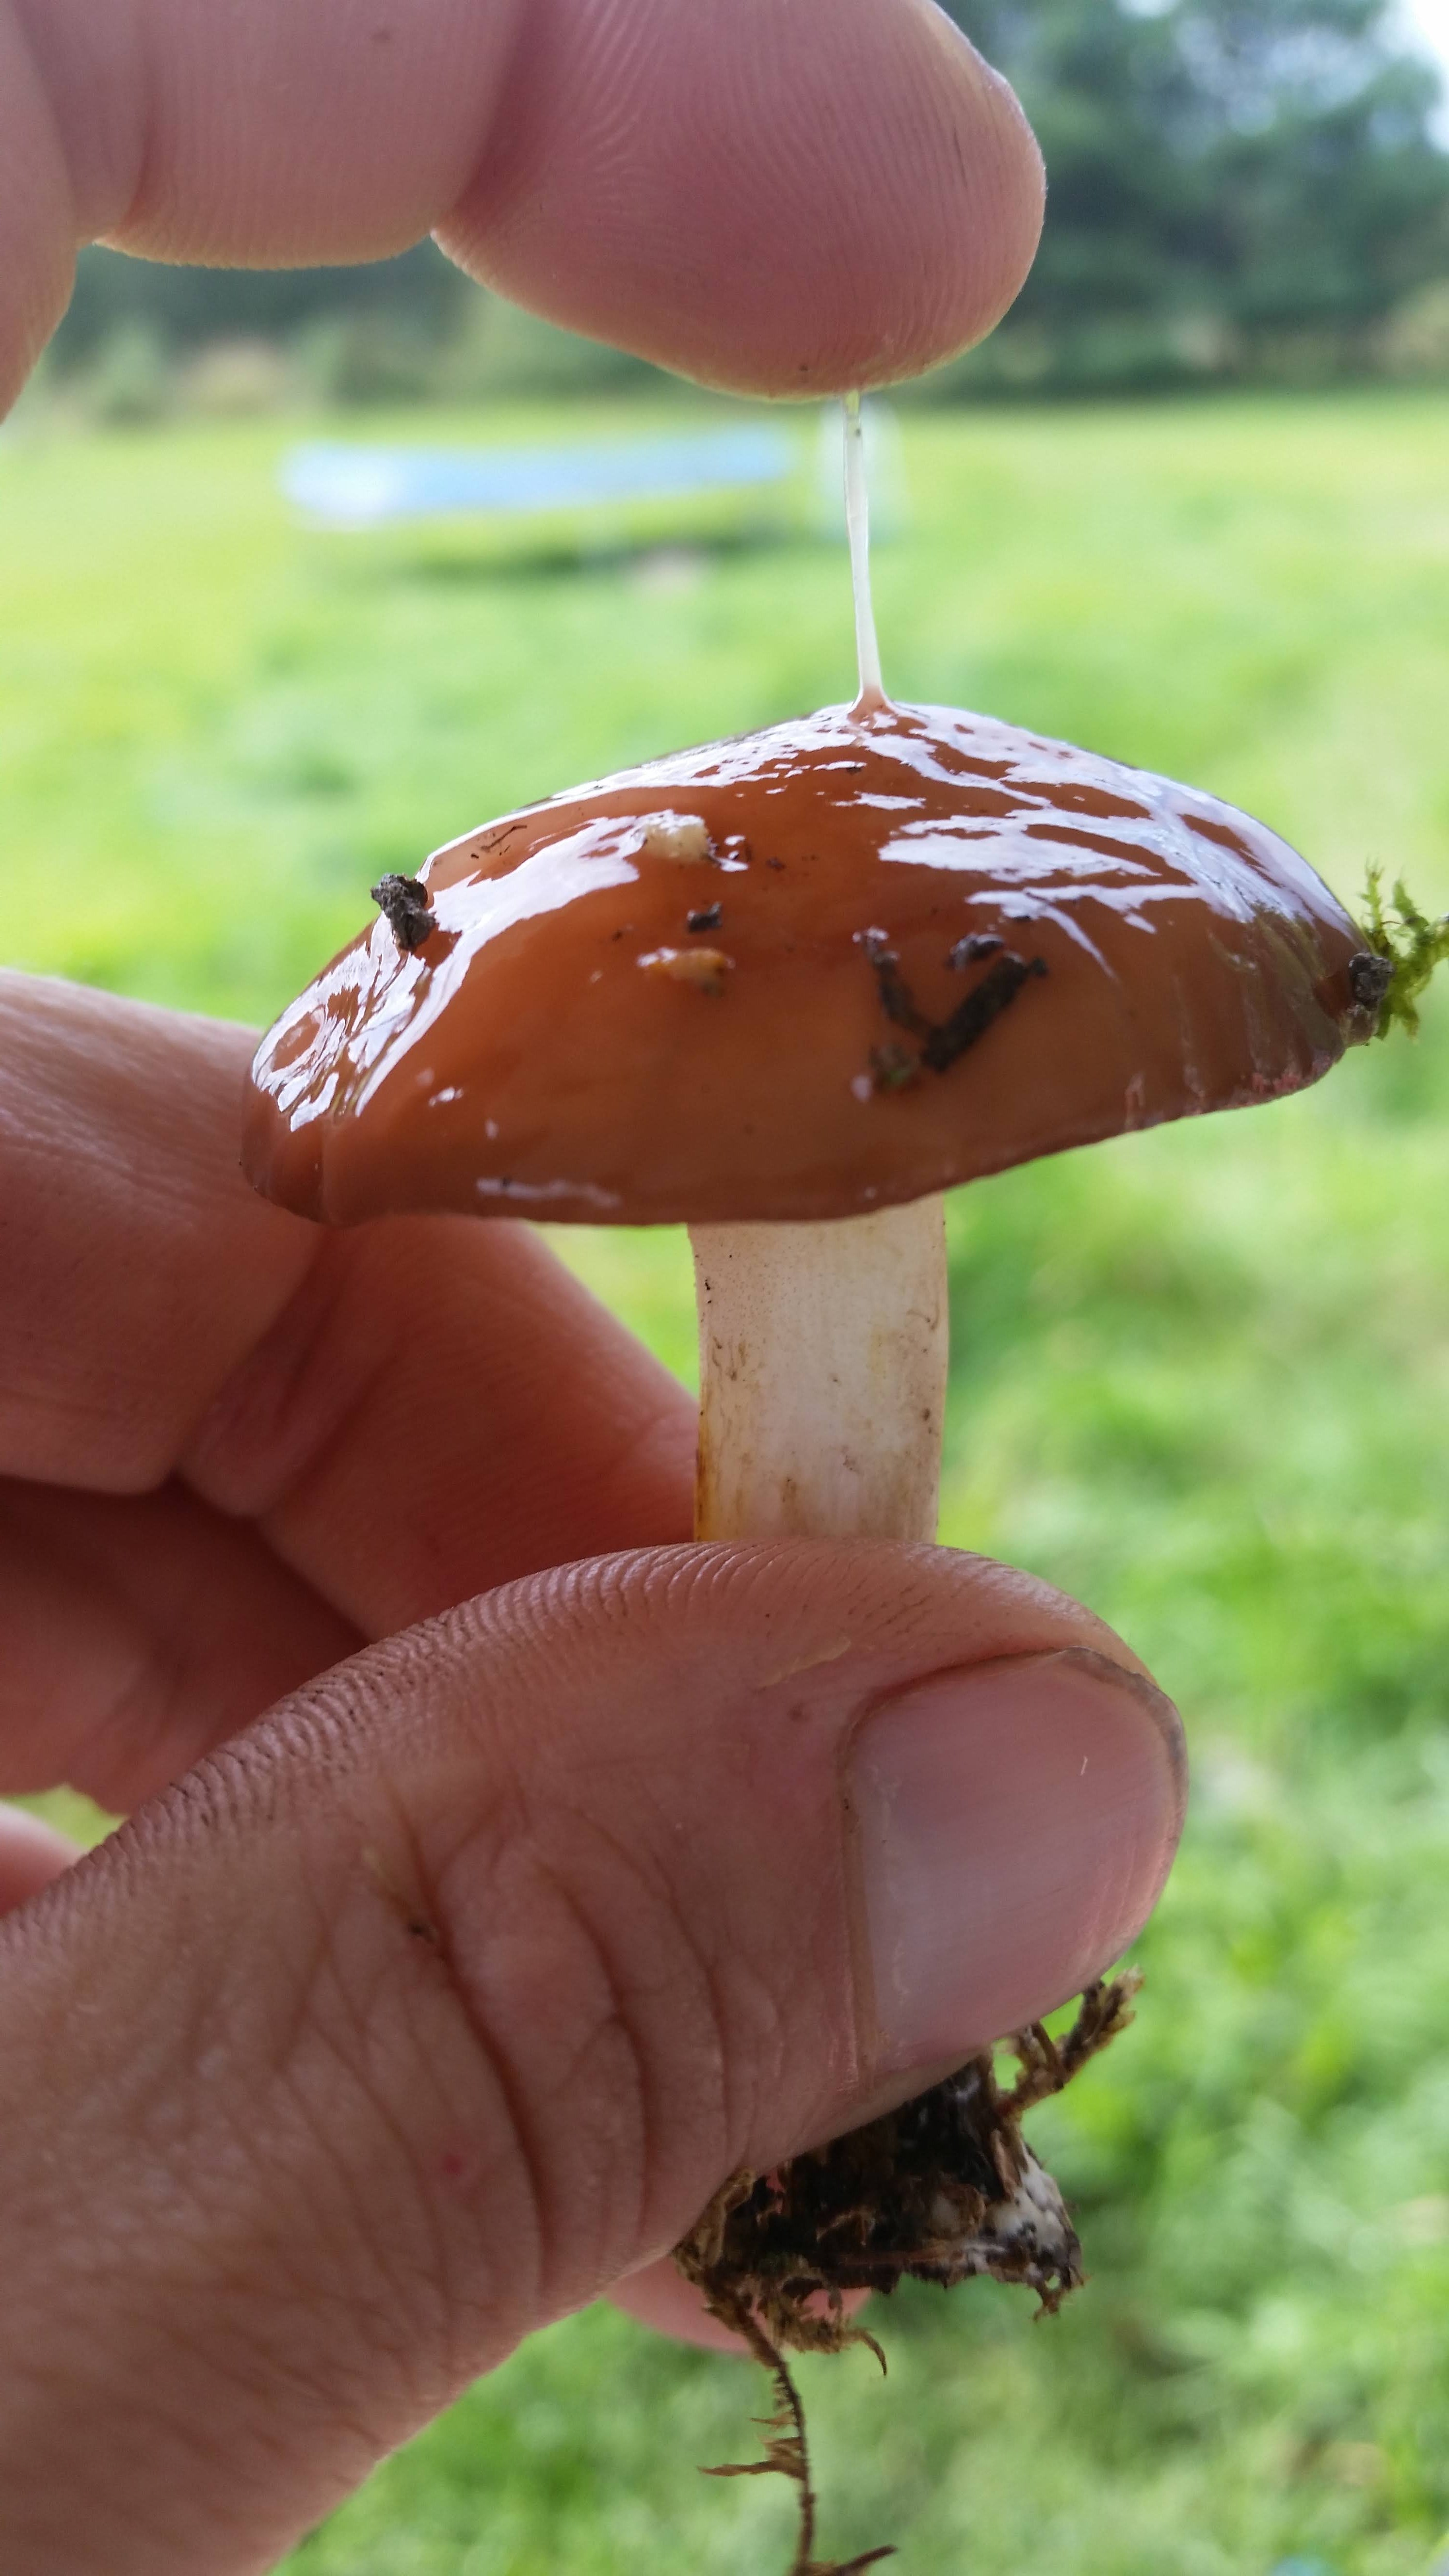 Introductory Mushroom Identification course with Viki Mather! -Friday September 29th 9:30am-3:30pm